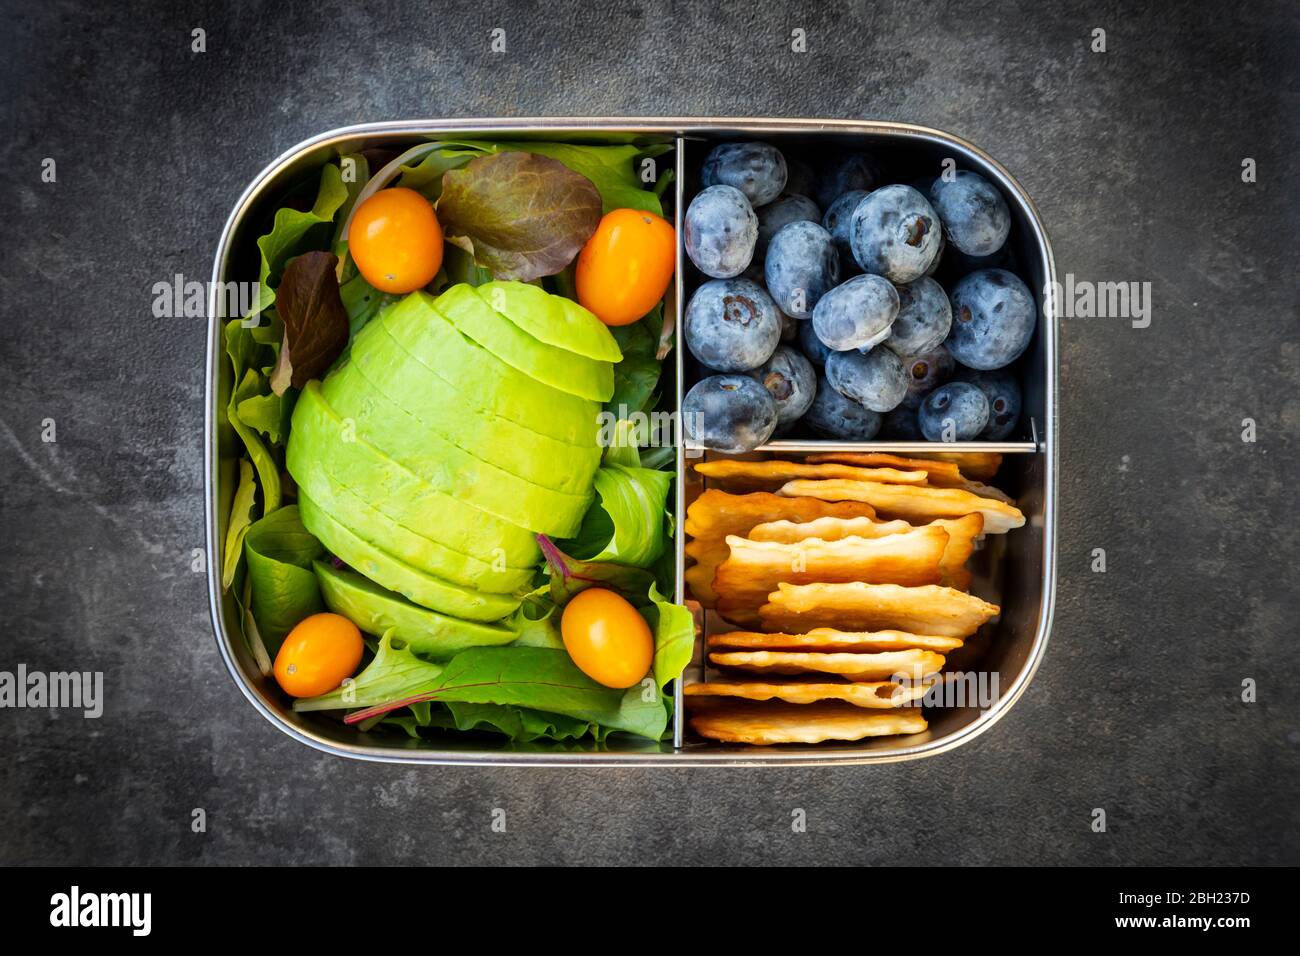 Lunch box with sliced avocado, yellow tomatoes, crackers, blueberries and green salad Stock Photo